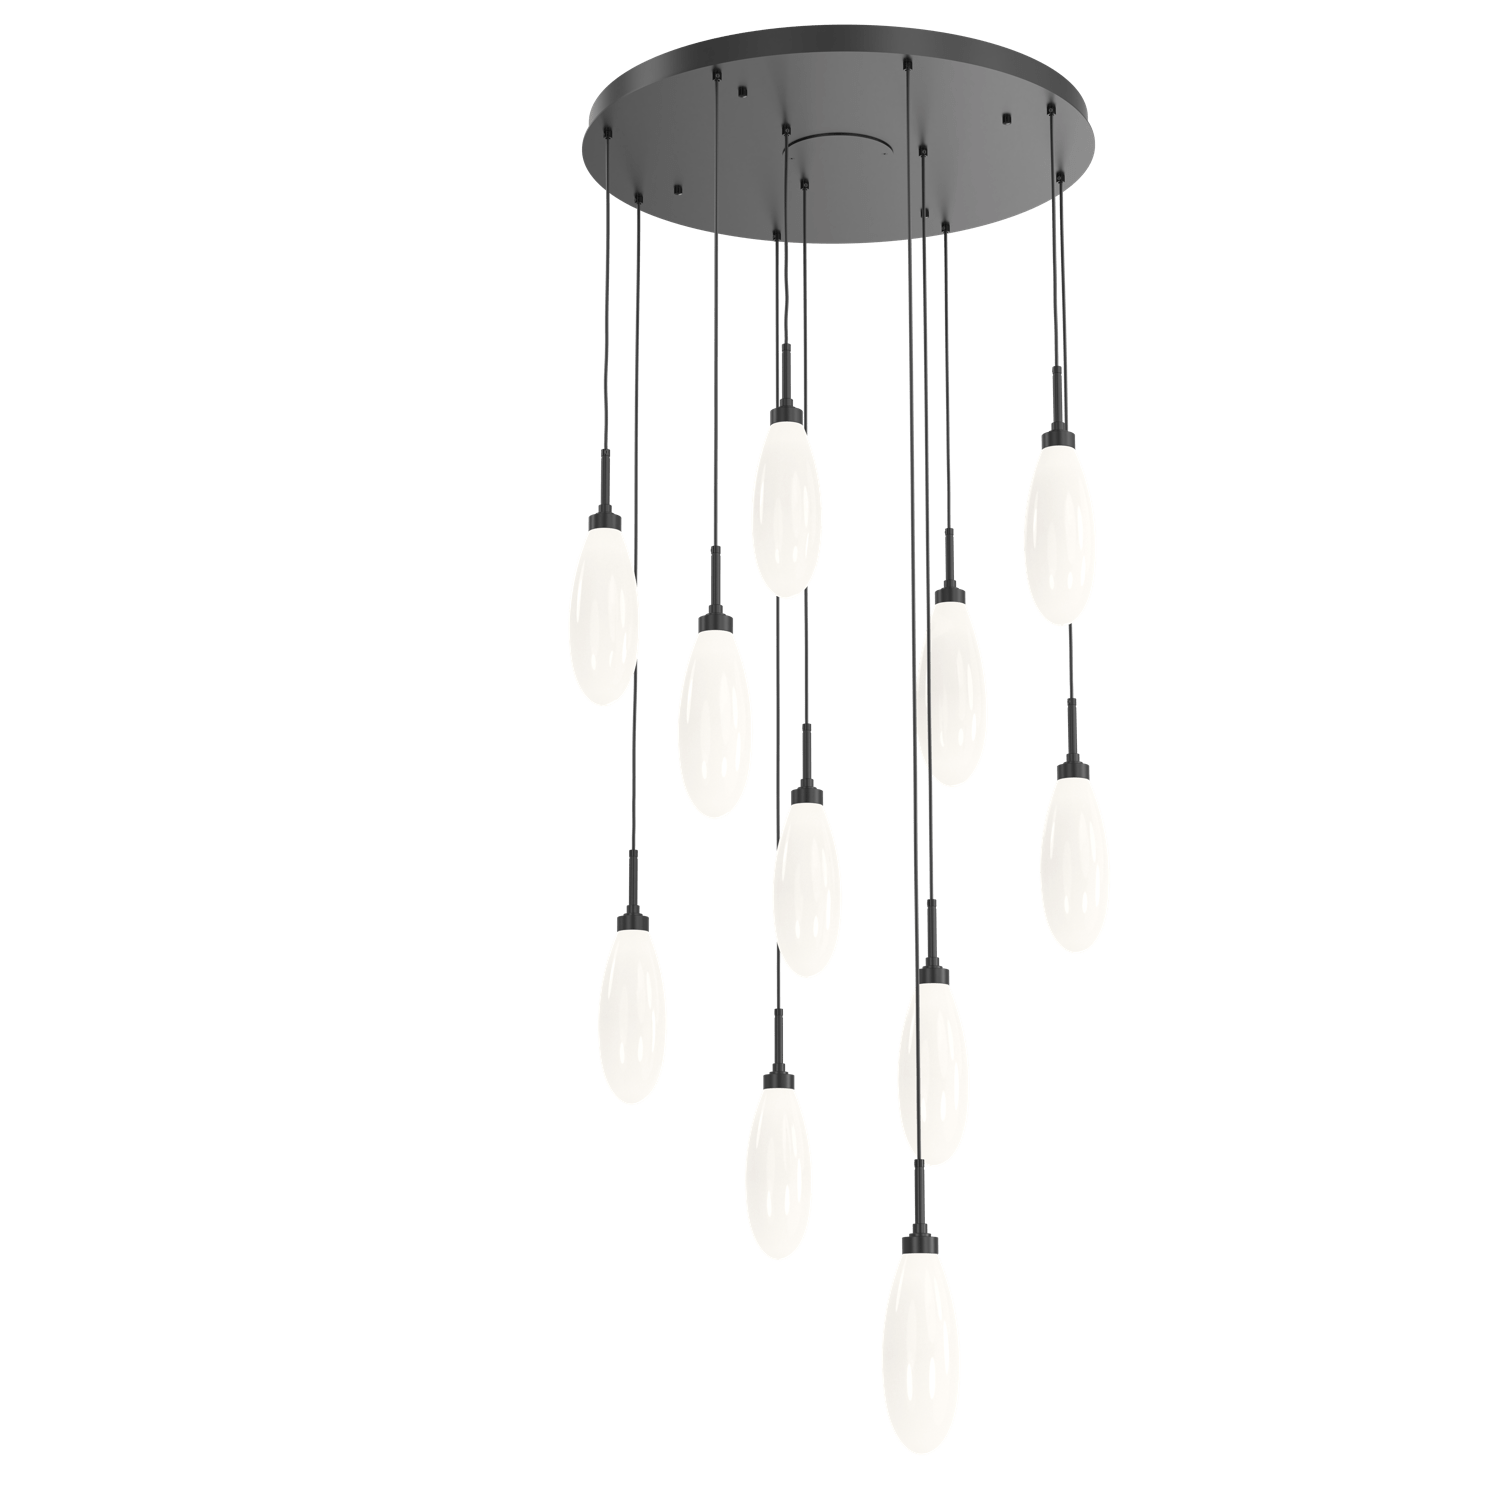 CHB0071-11-MB-WL-LL-Hammerton-Studio-Fiori-11-light-round-pendant-chandelier-with-matte-black-finish-and-opal-white-glass-shades-and-LED-lamping